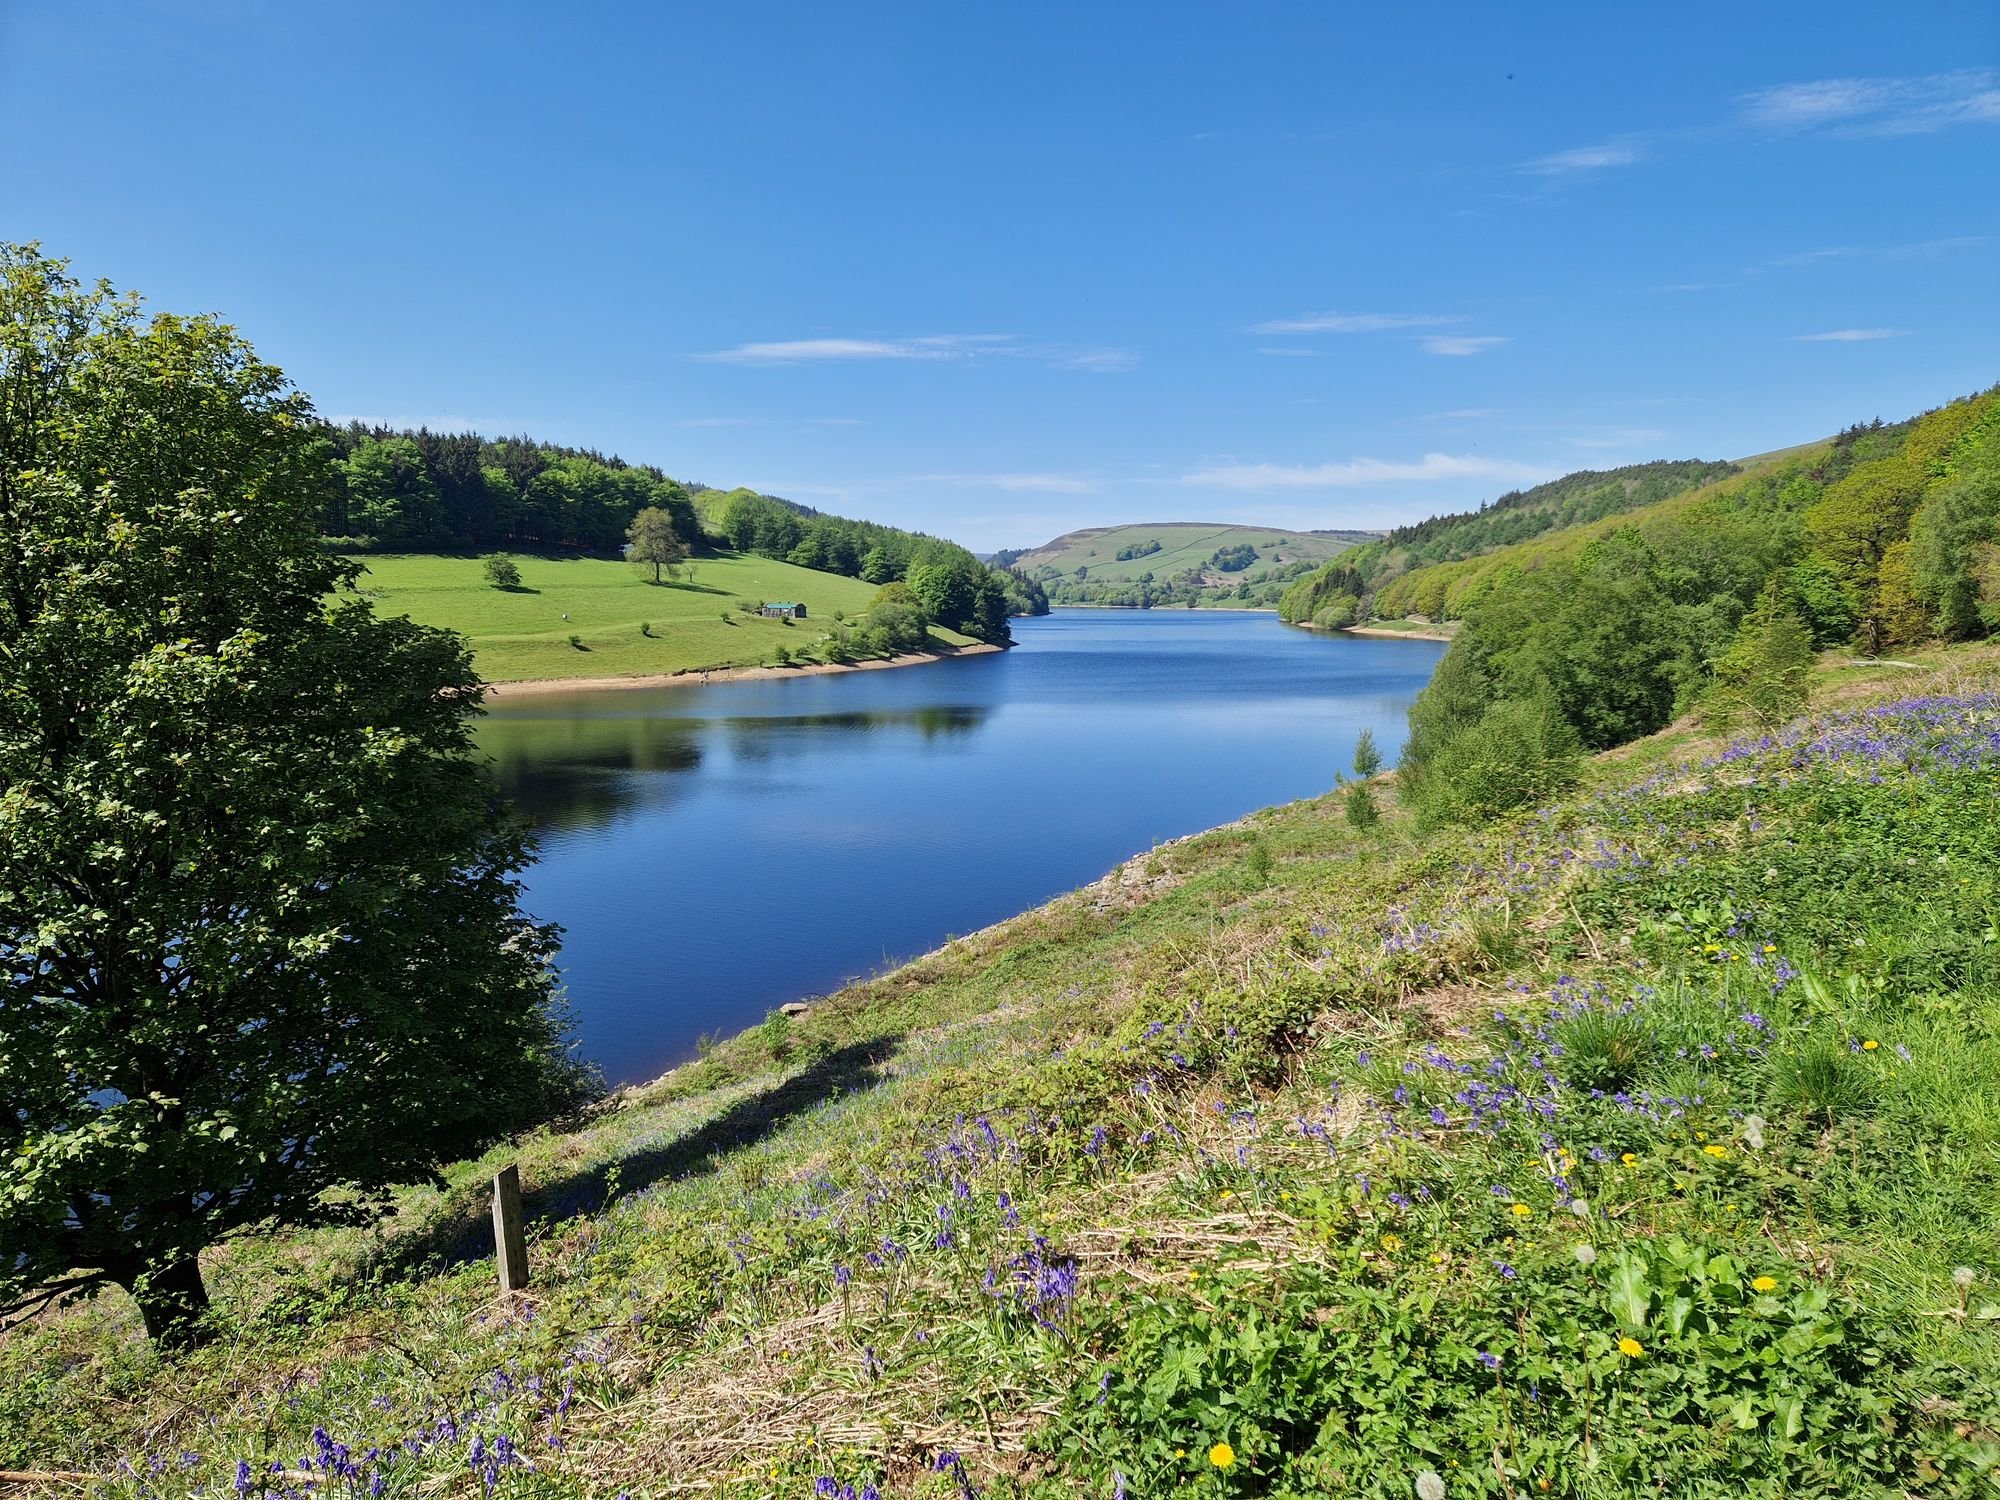 The still waters of Ladybower Reservoir on a clear day, with blue skies.